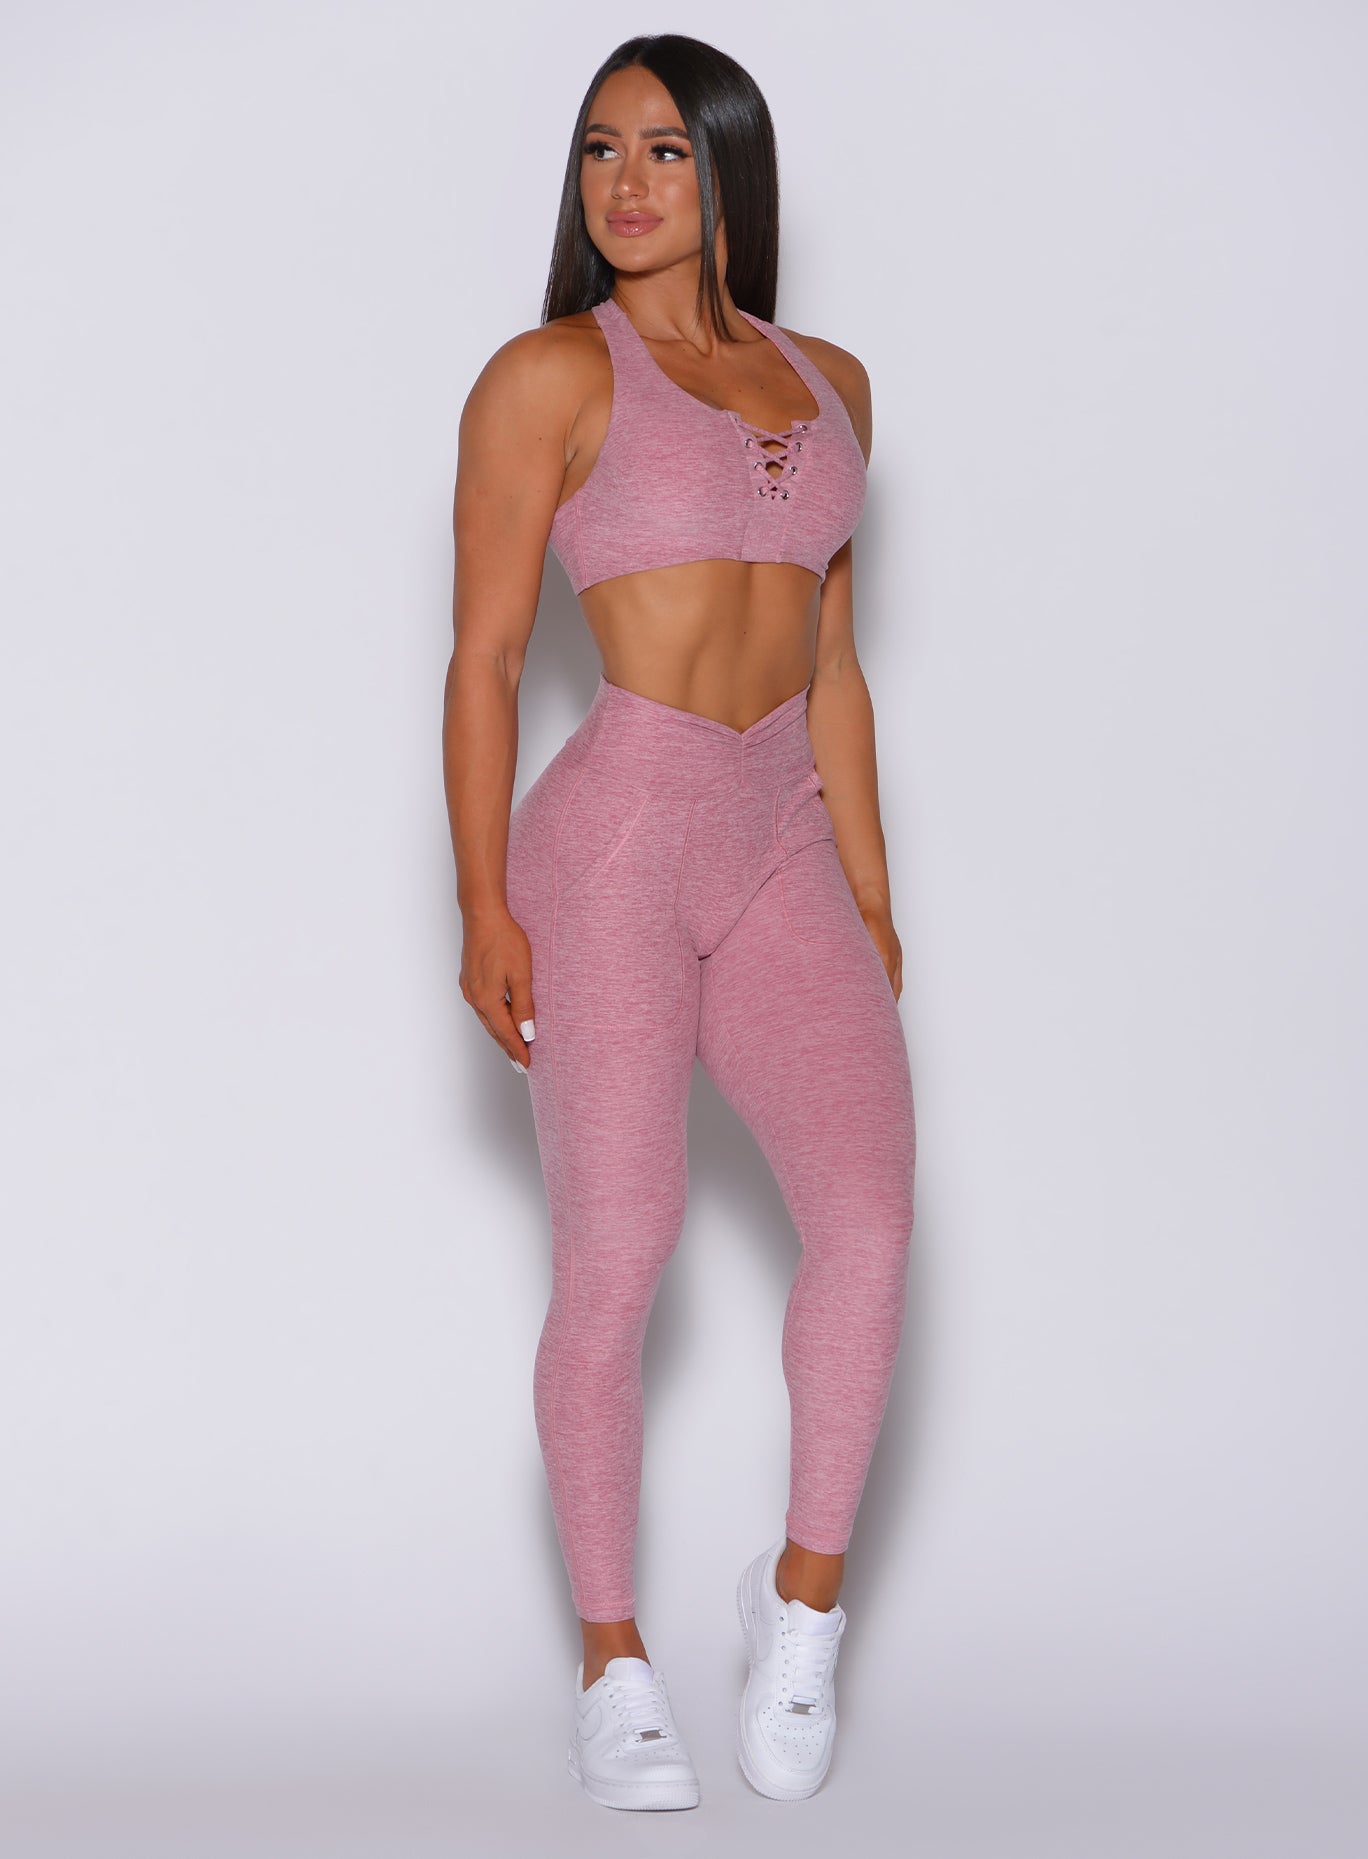 Front profile view of a model facing to her right wearing our V scrunch leggings in rose blush color and a matching bra